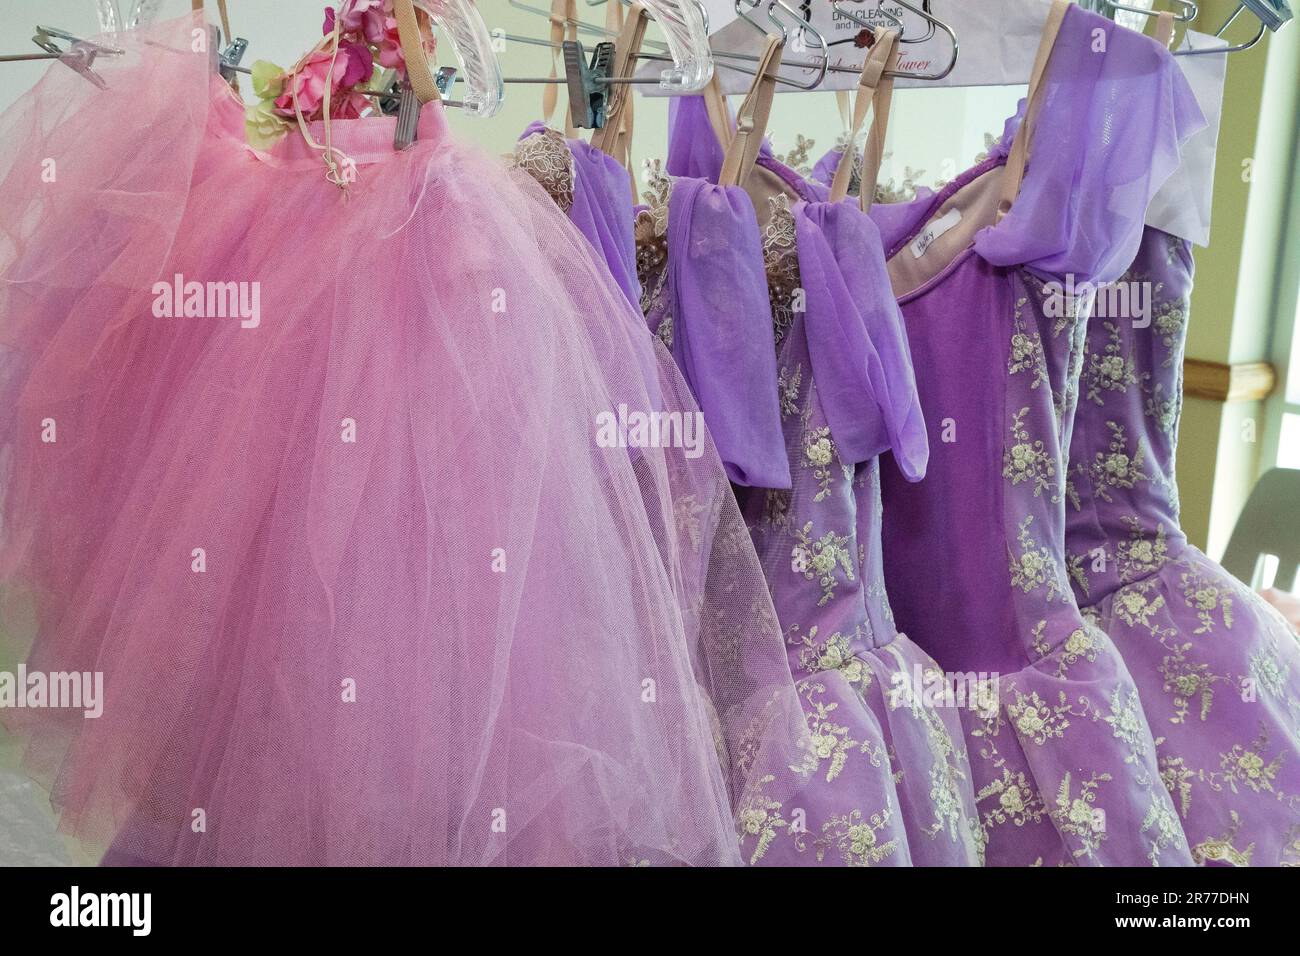 Colorful ballet costumes Stock Photo